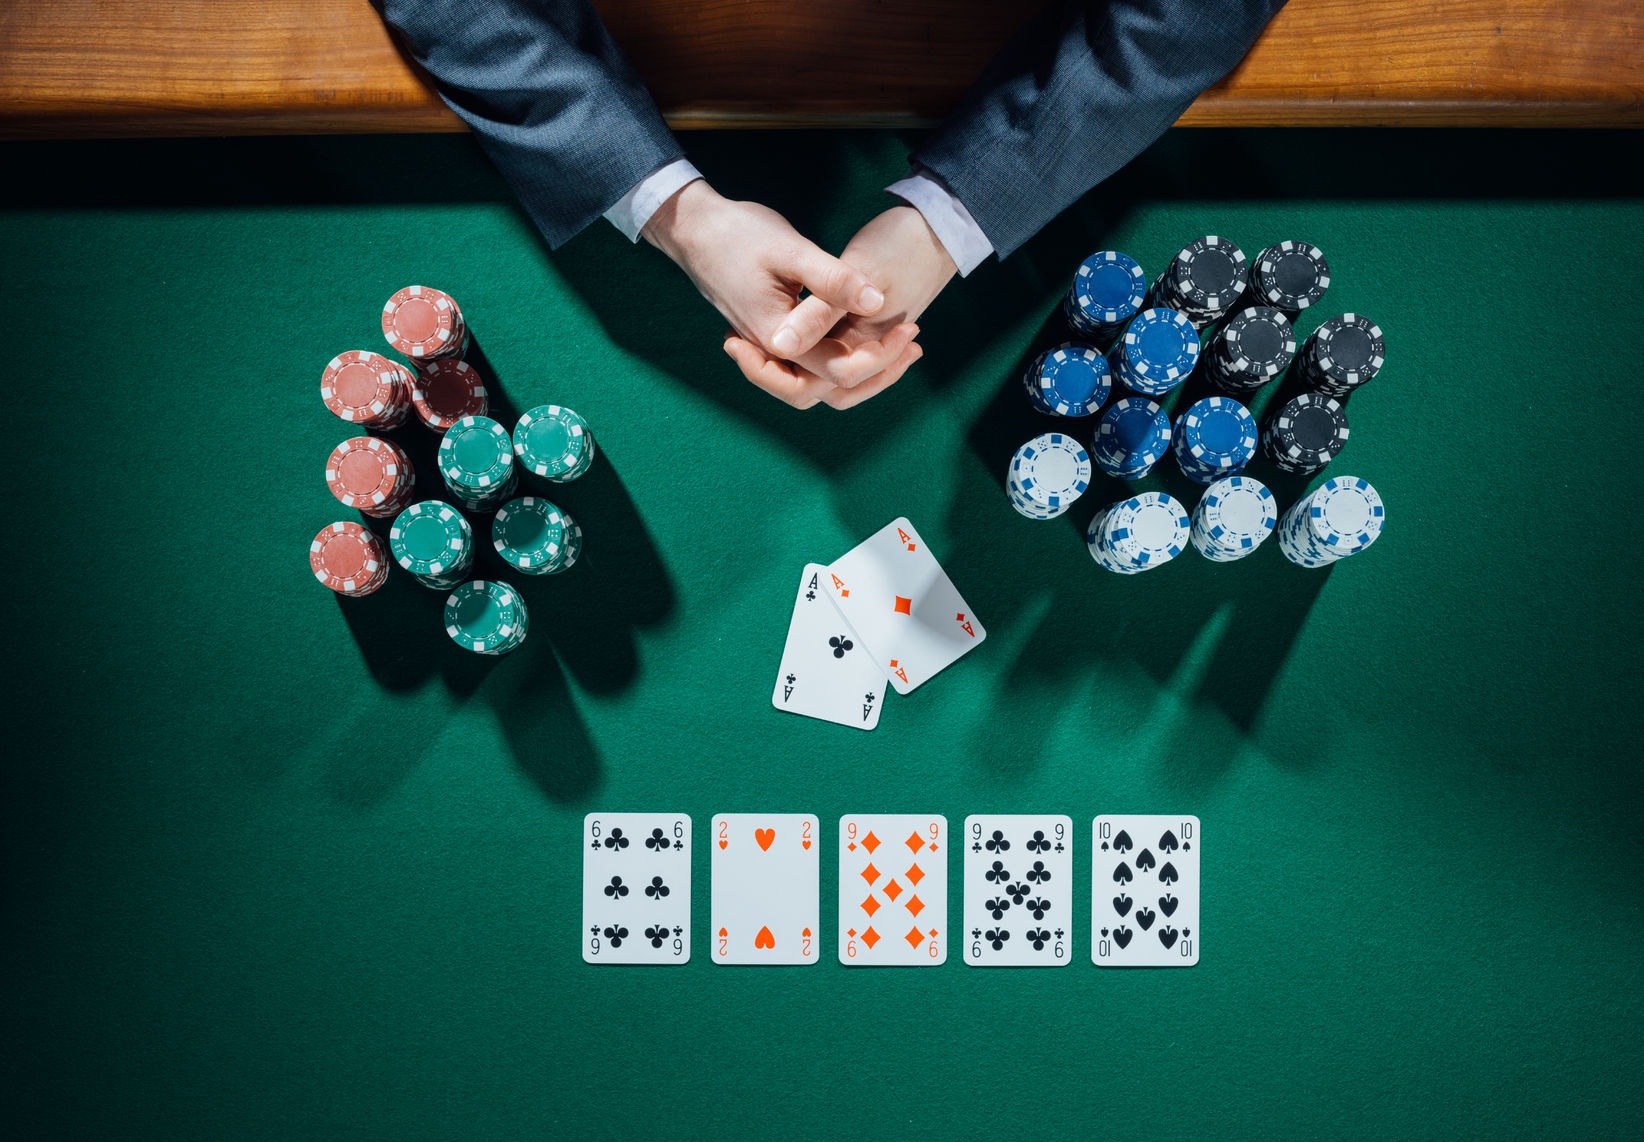 Know more about online betting in Poker games